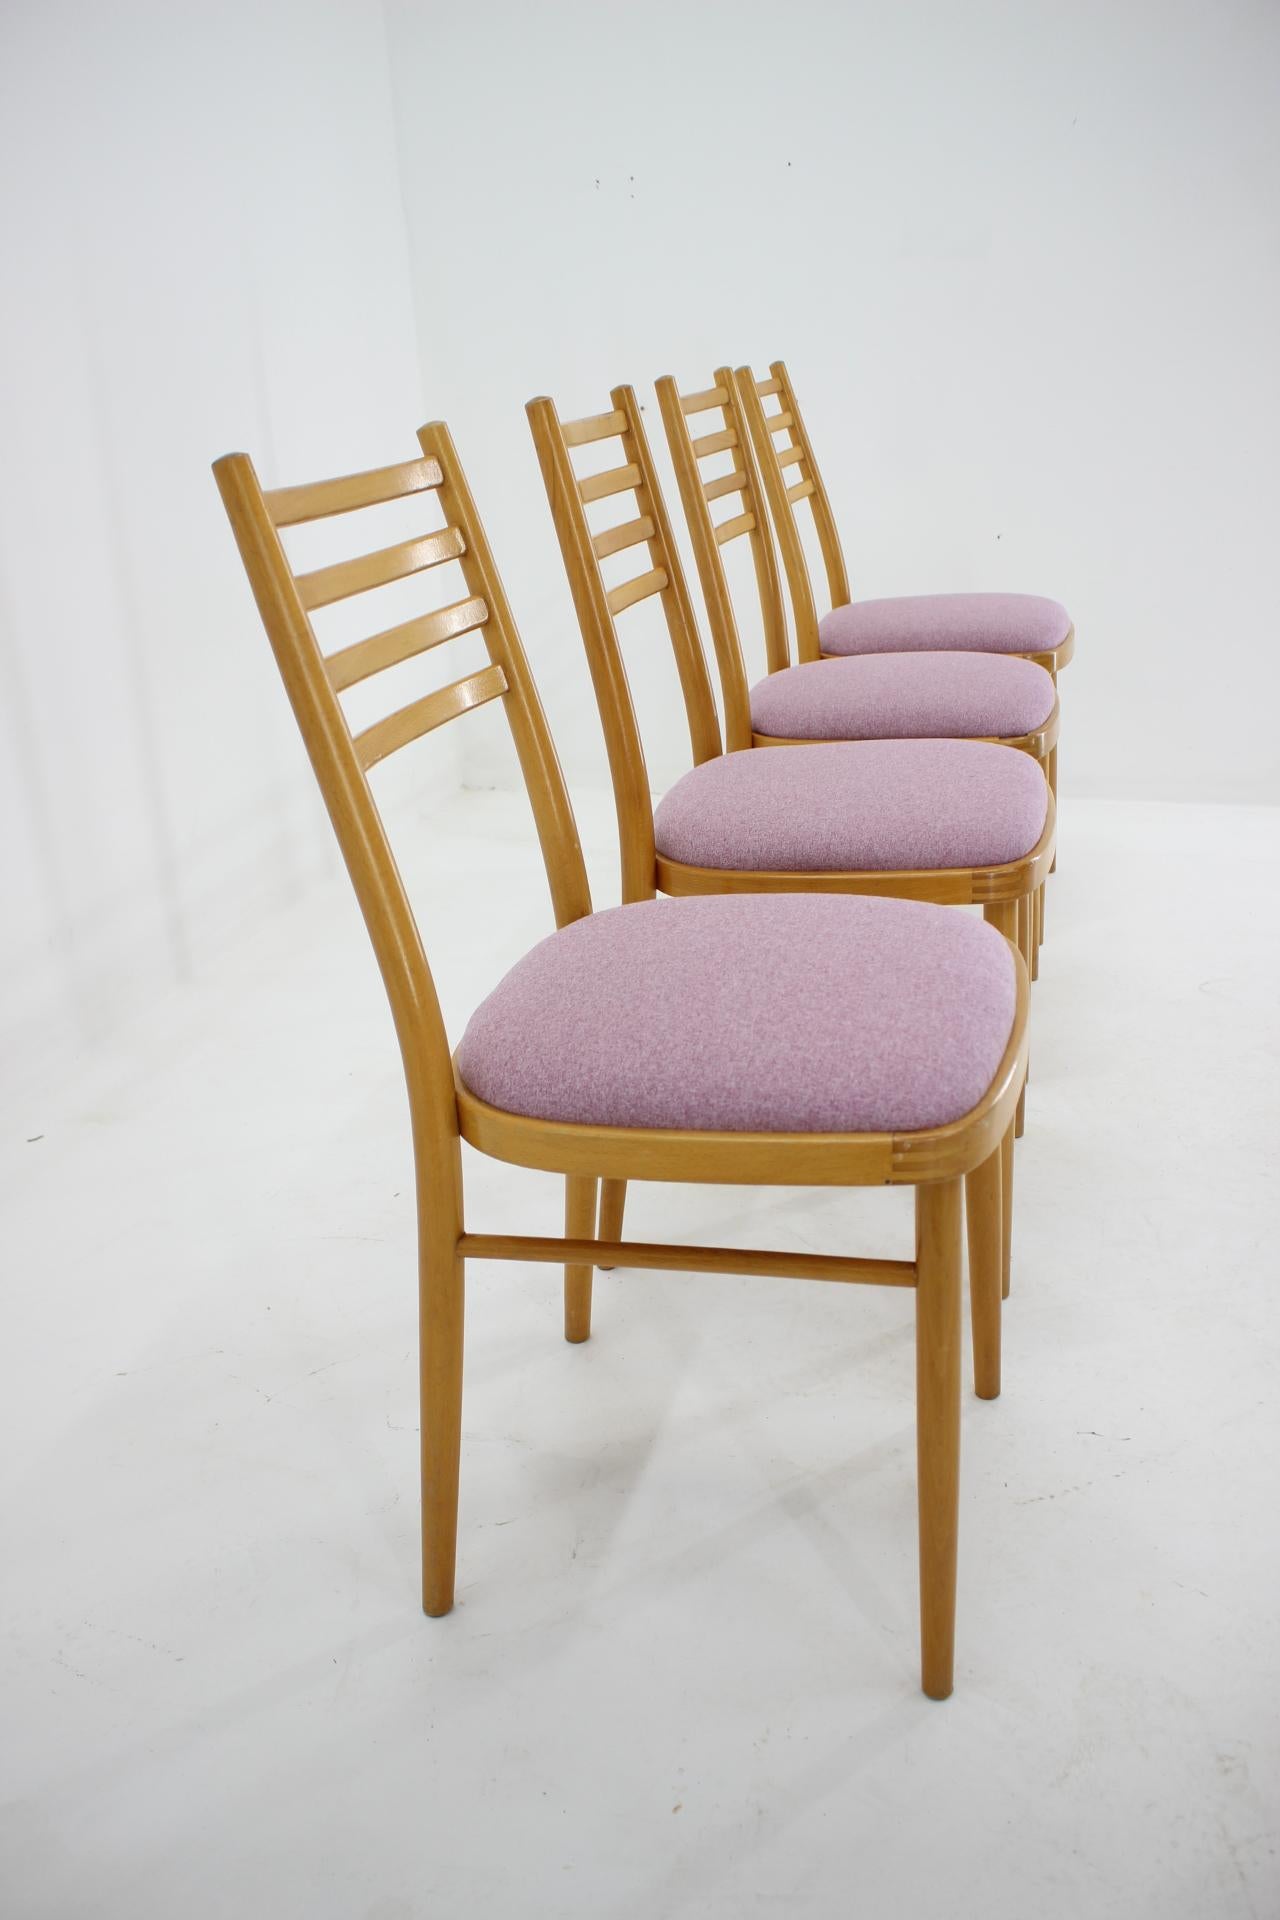 Set of Four Midcentury Dining Chairs by Interier Praha, 1970, Czechoslovakia For Sale 1